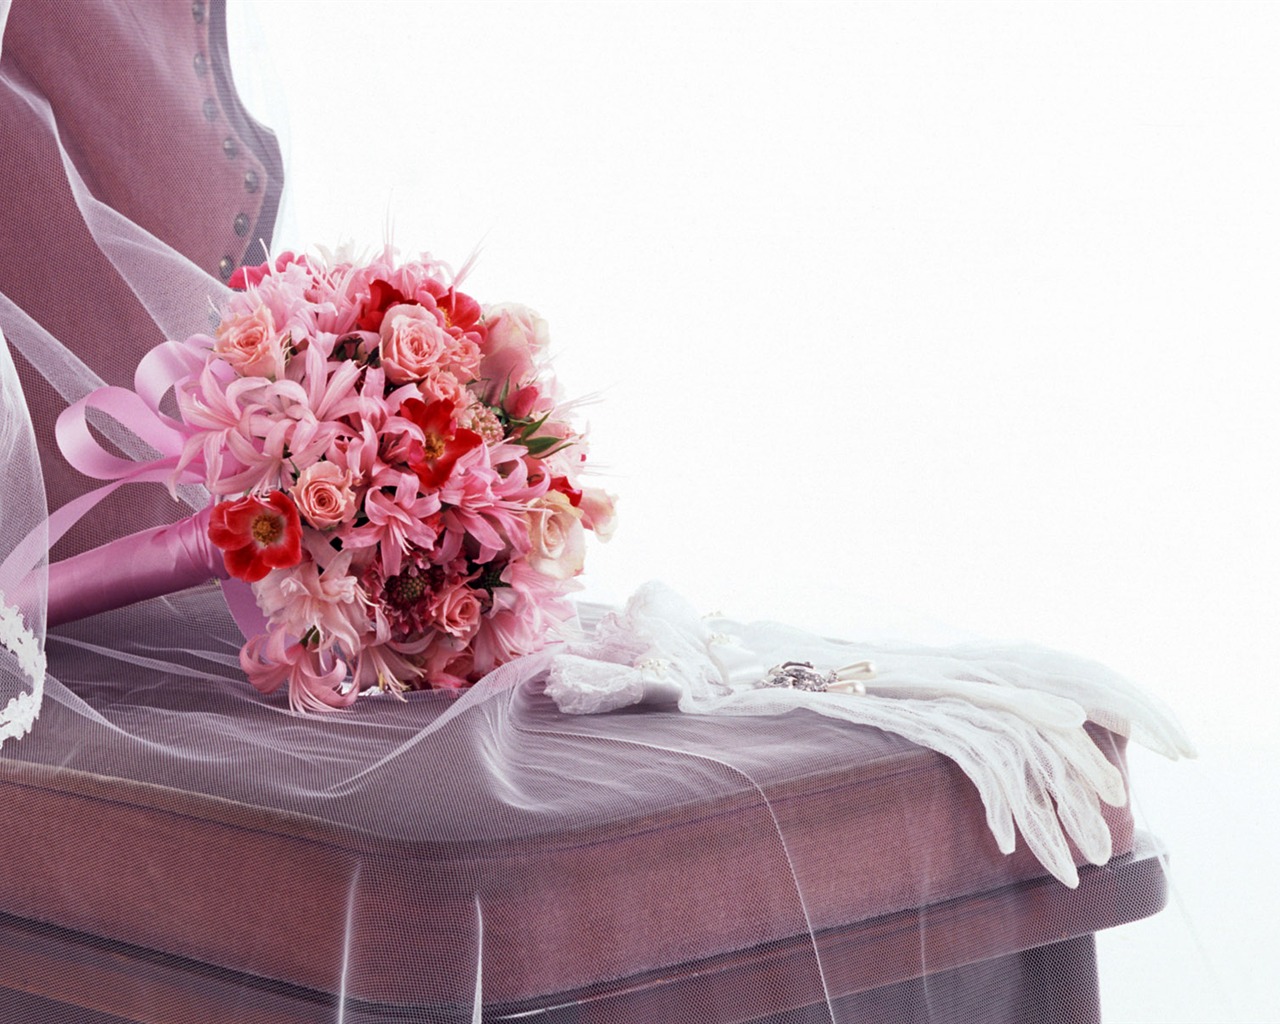 Weddings and Flowers wallpaper (1) #8 - 1280x1024